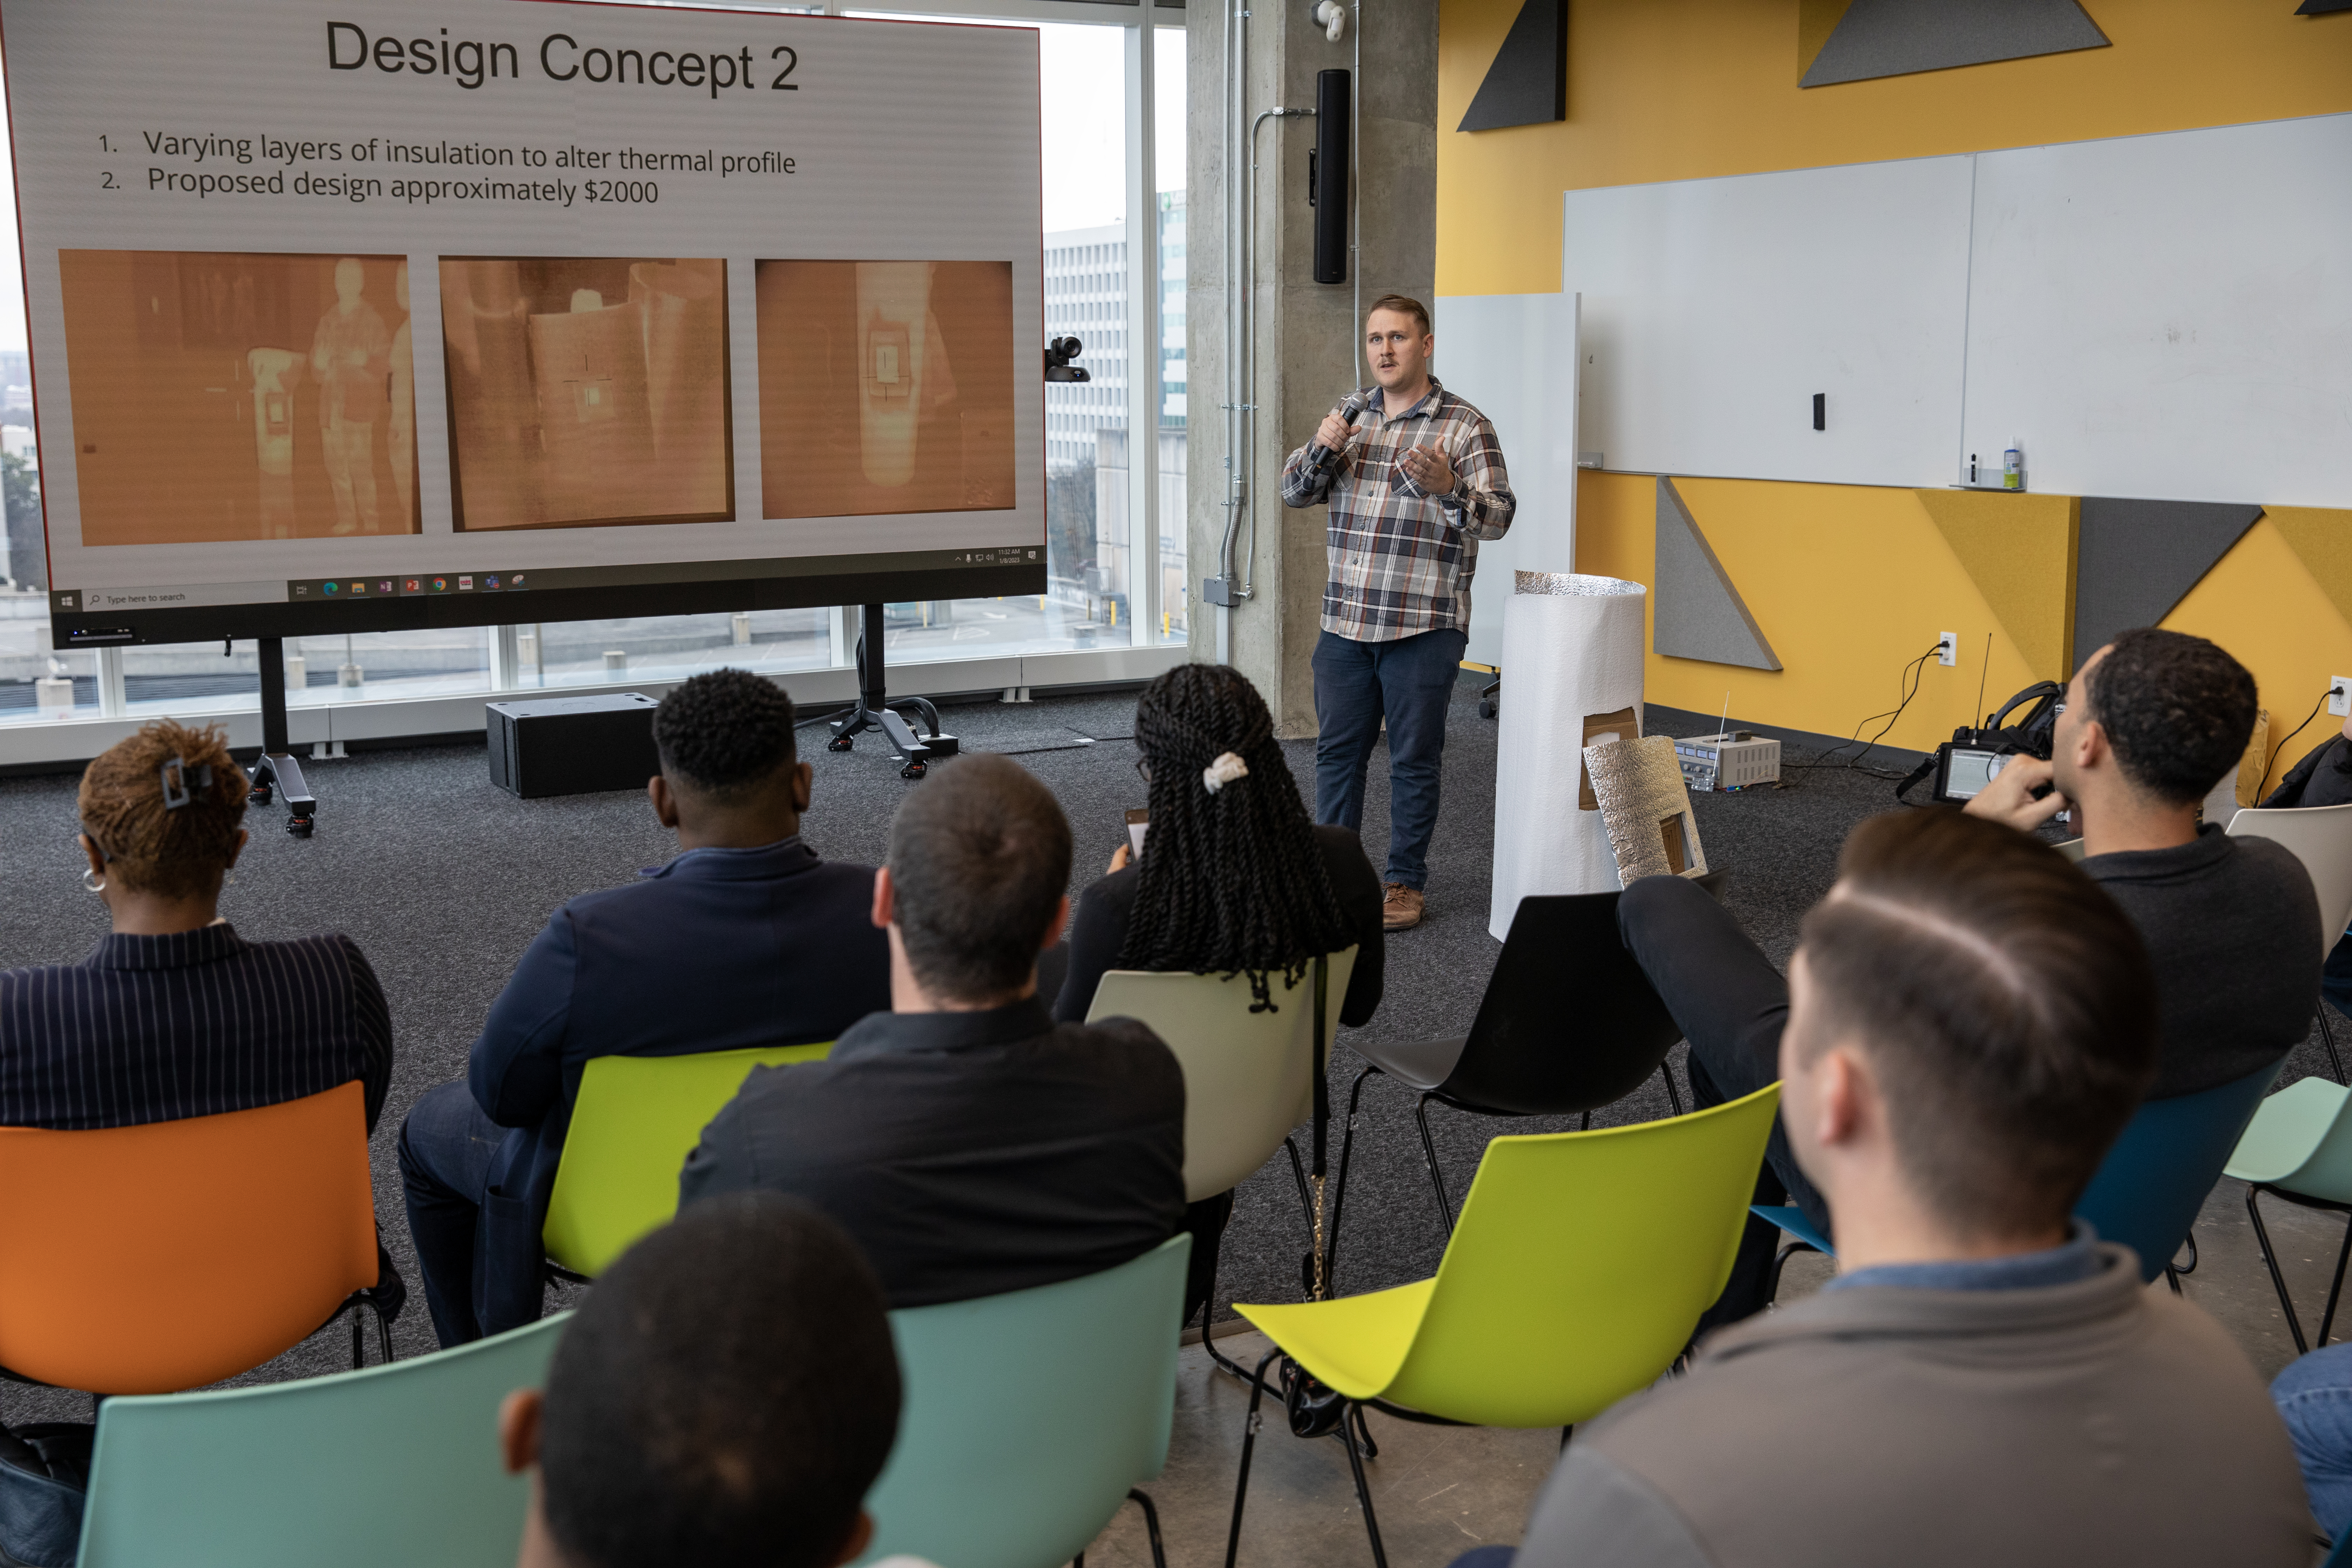 On the fourth day of the event, each group presented on their design concept and progress.